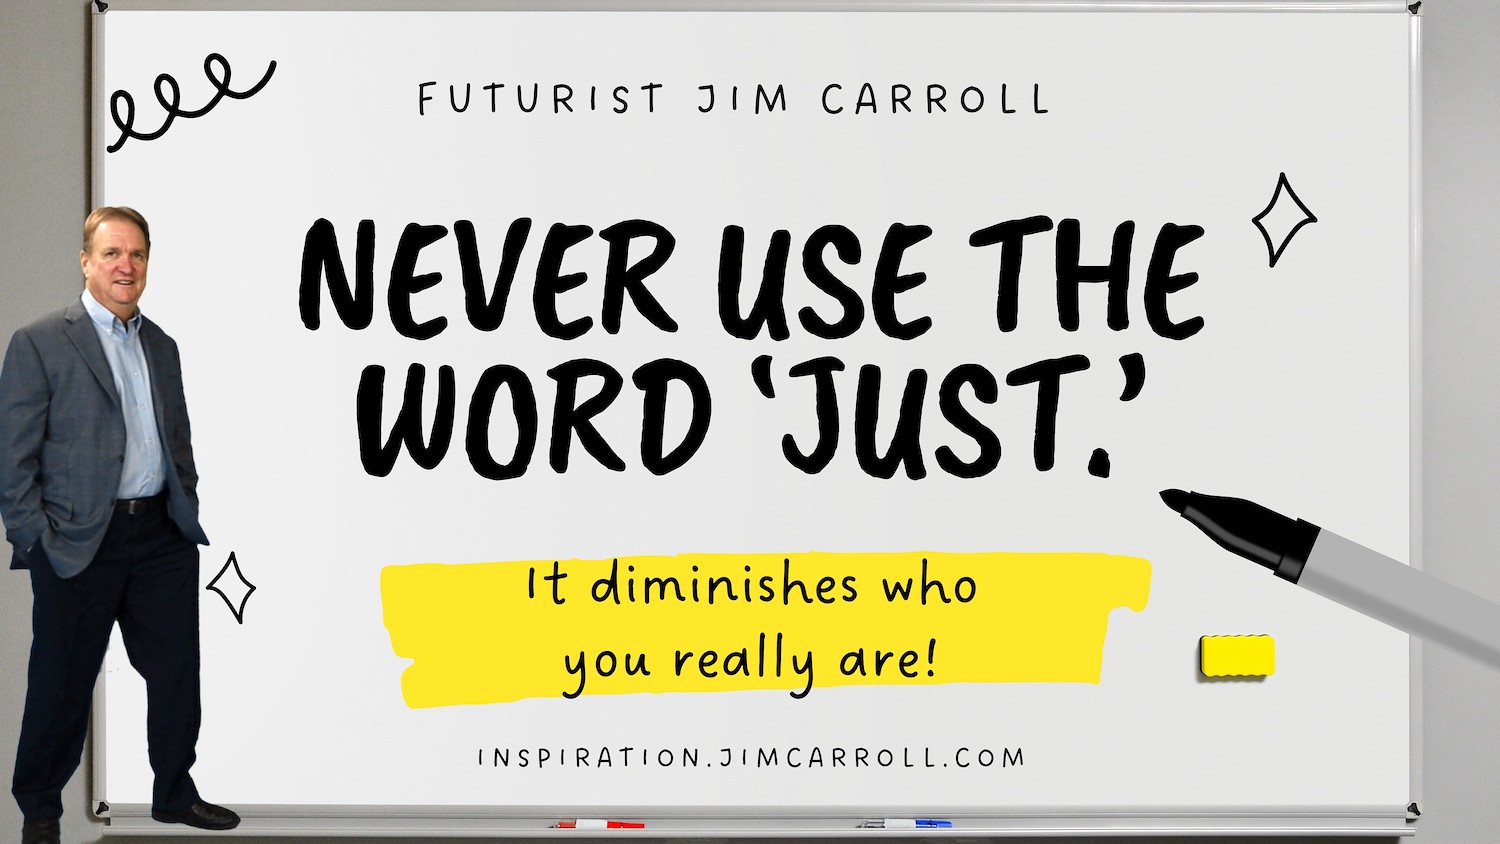 "Never use the word 'just. It diminishes who you really are!" - Futurist Jim Carroll